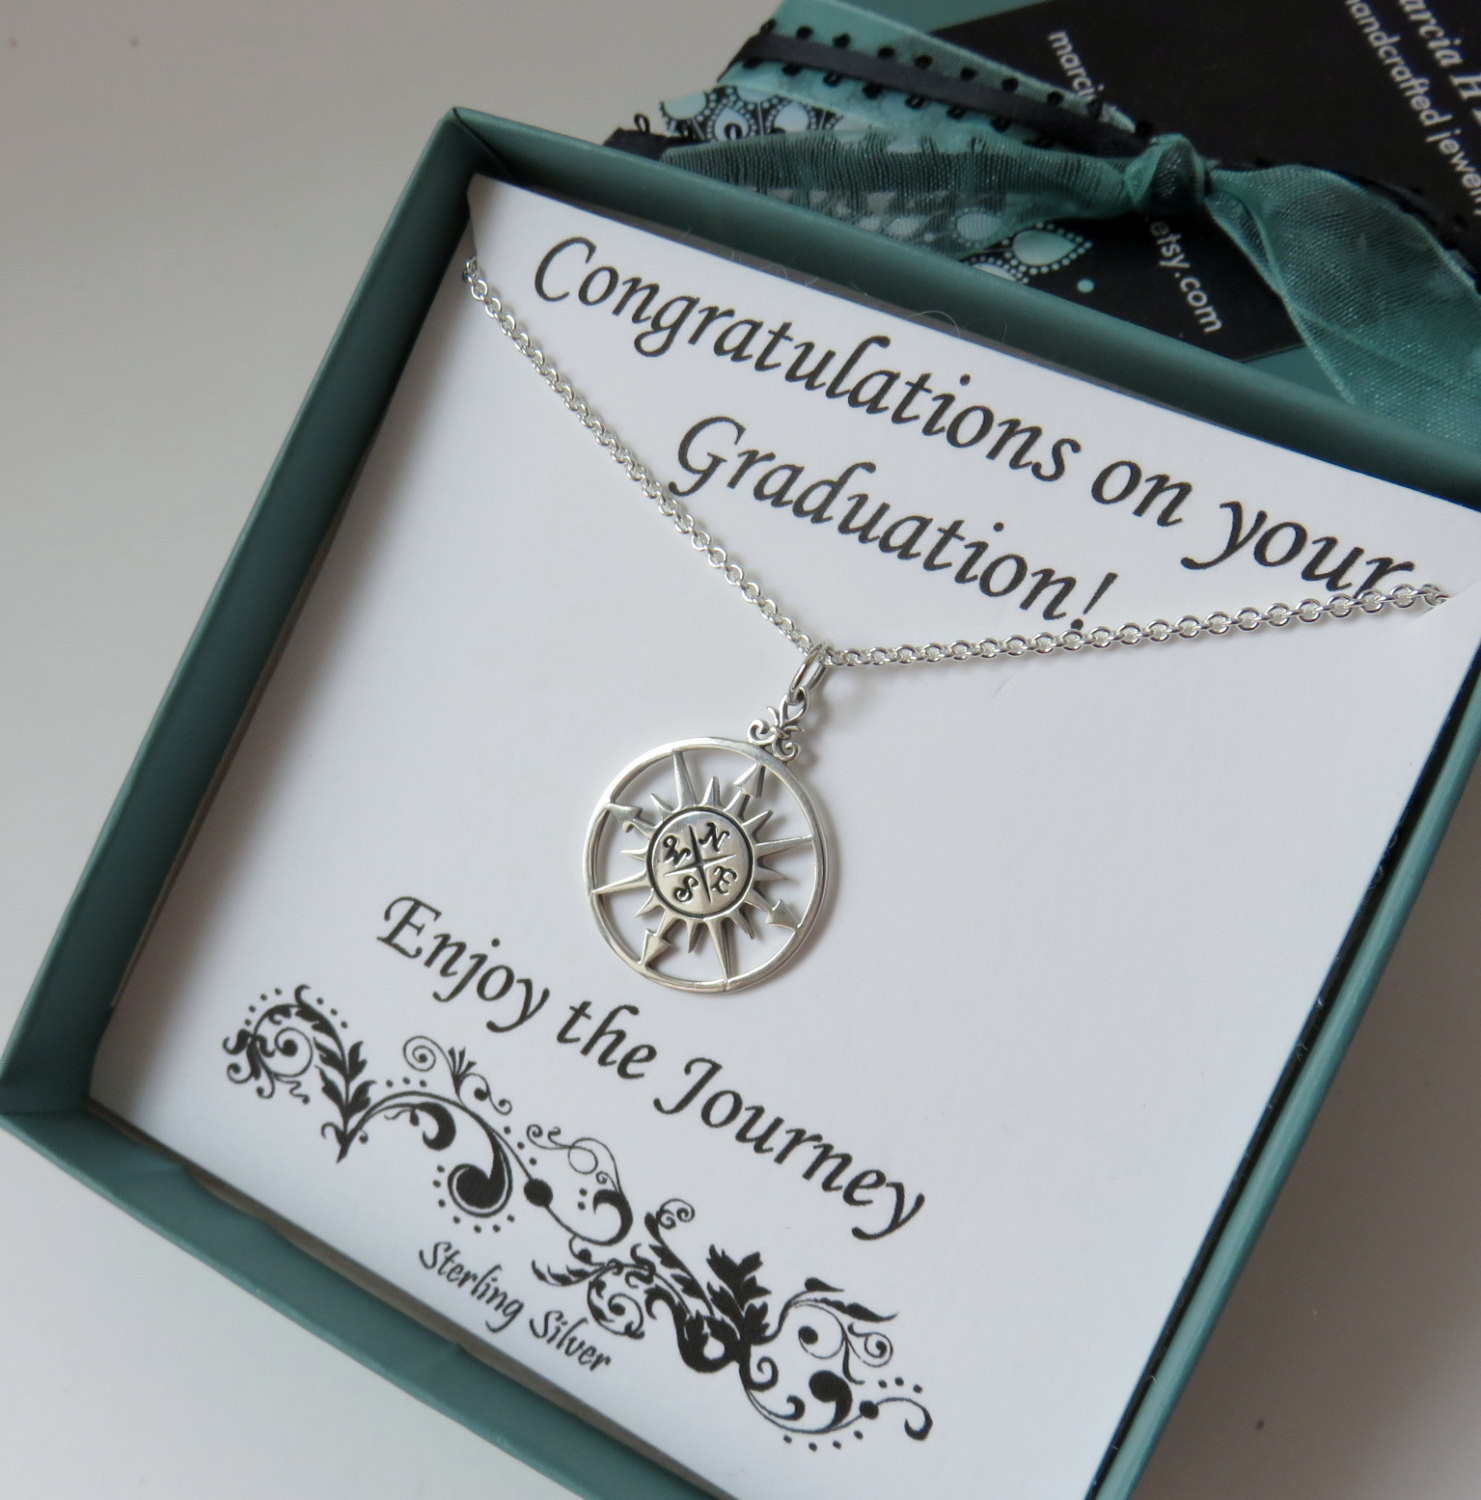 Graduation Jewelry Gift Ideas For Her
 Graduation Gift for Her sterling silver high school